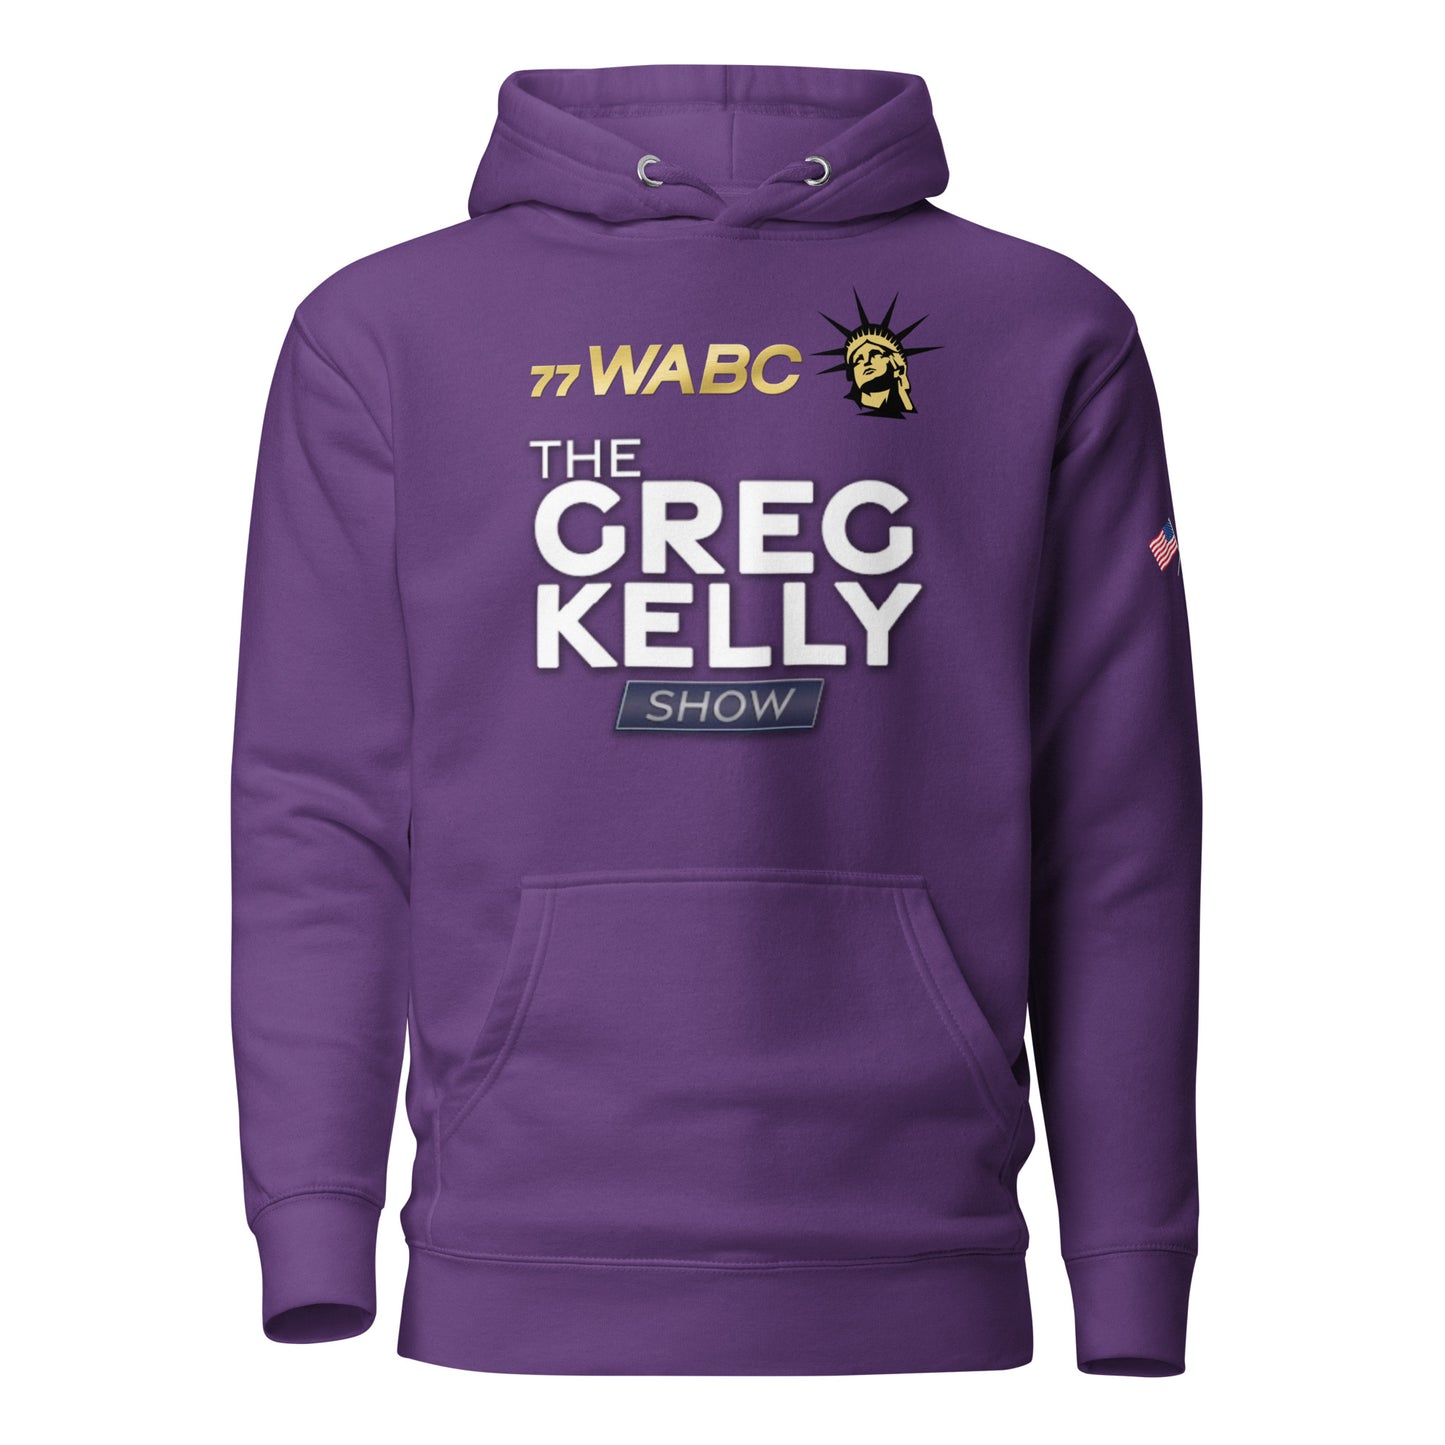 The Greg Kelly Show Unisex Hoodie